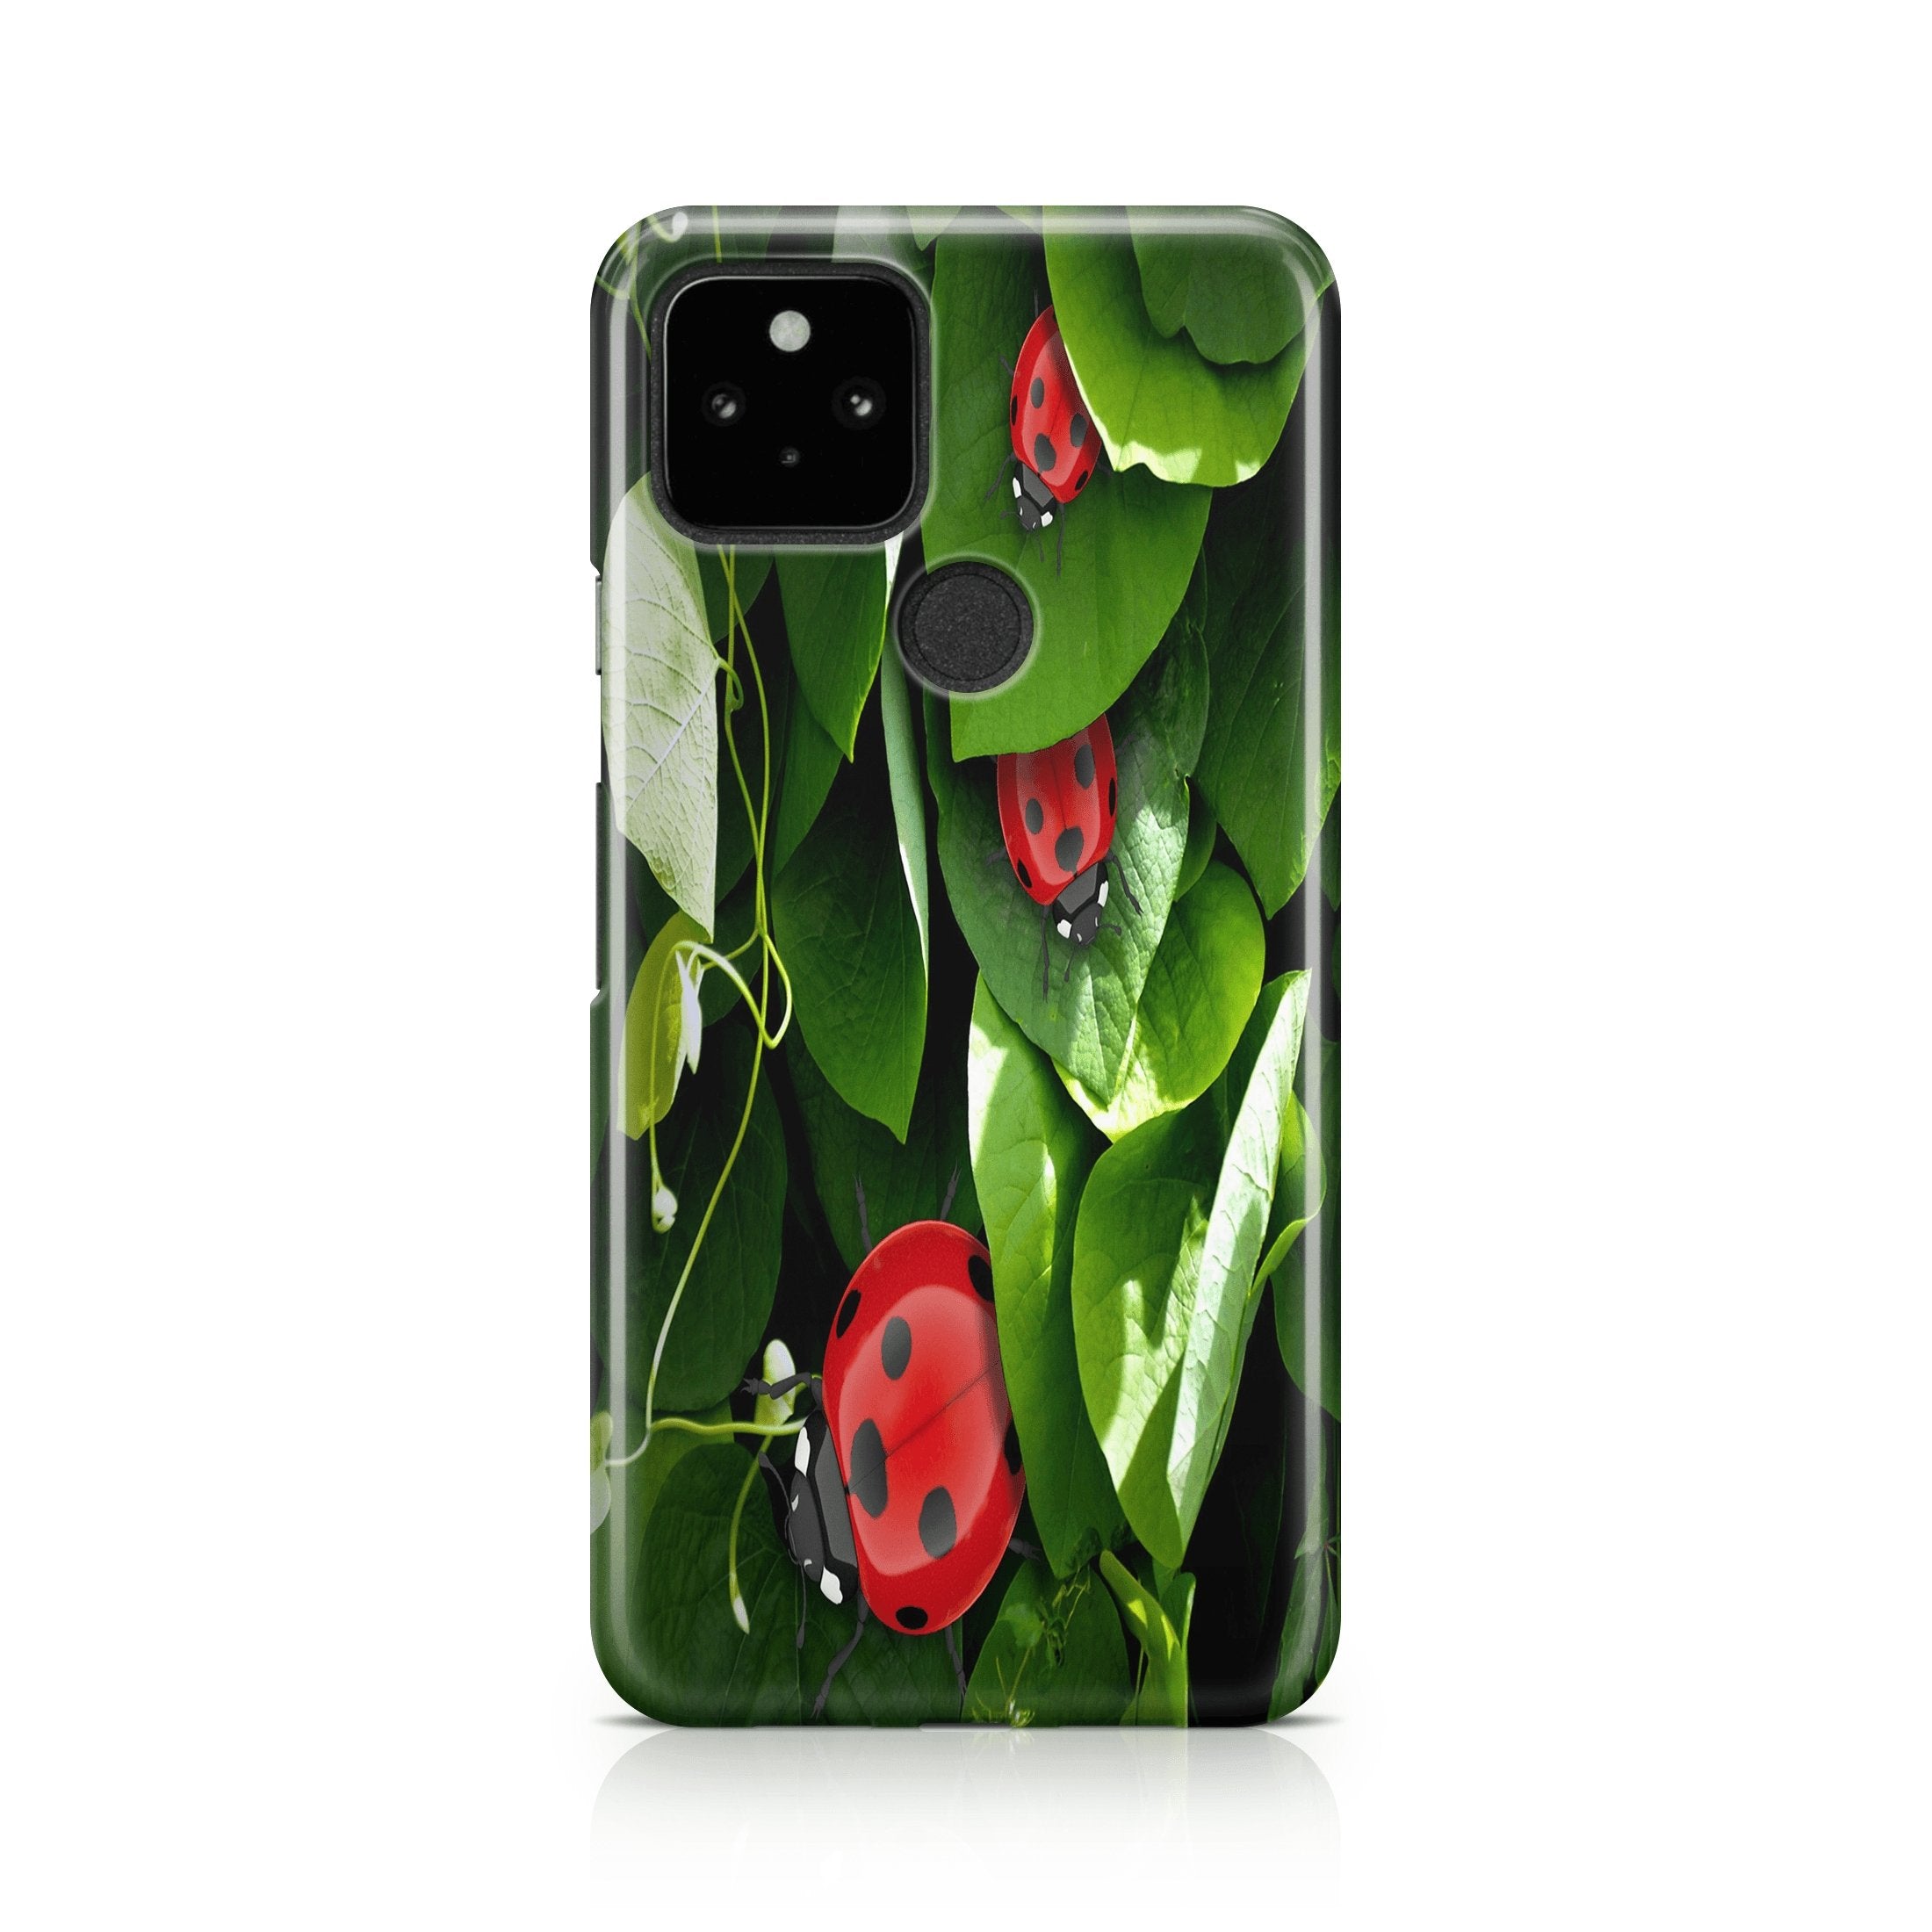 Lucky Ladybug - Google phone case designs by CaseSwagger